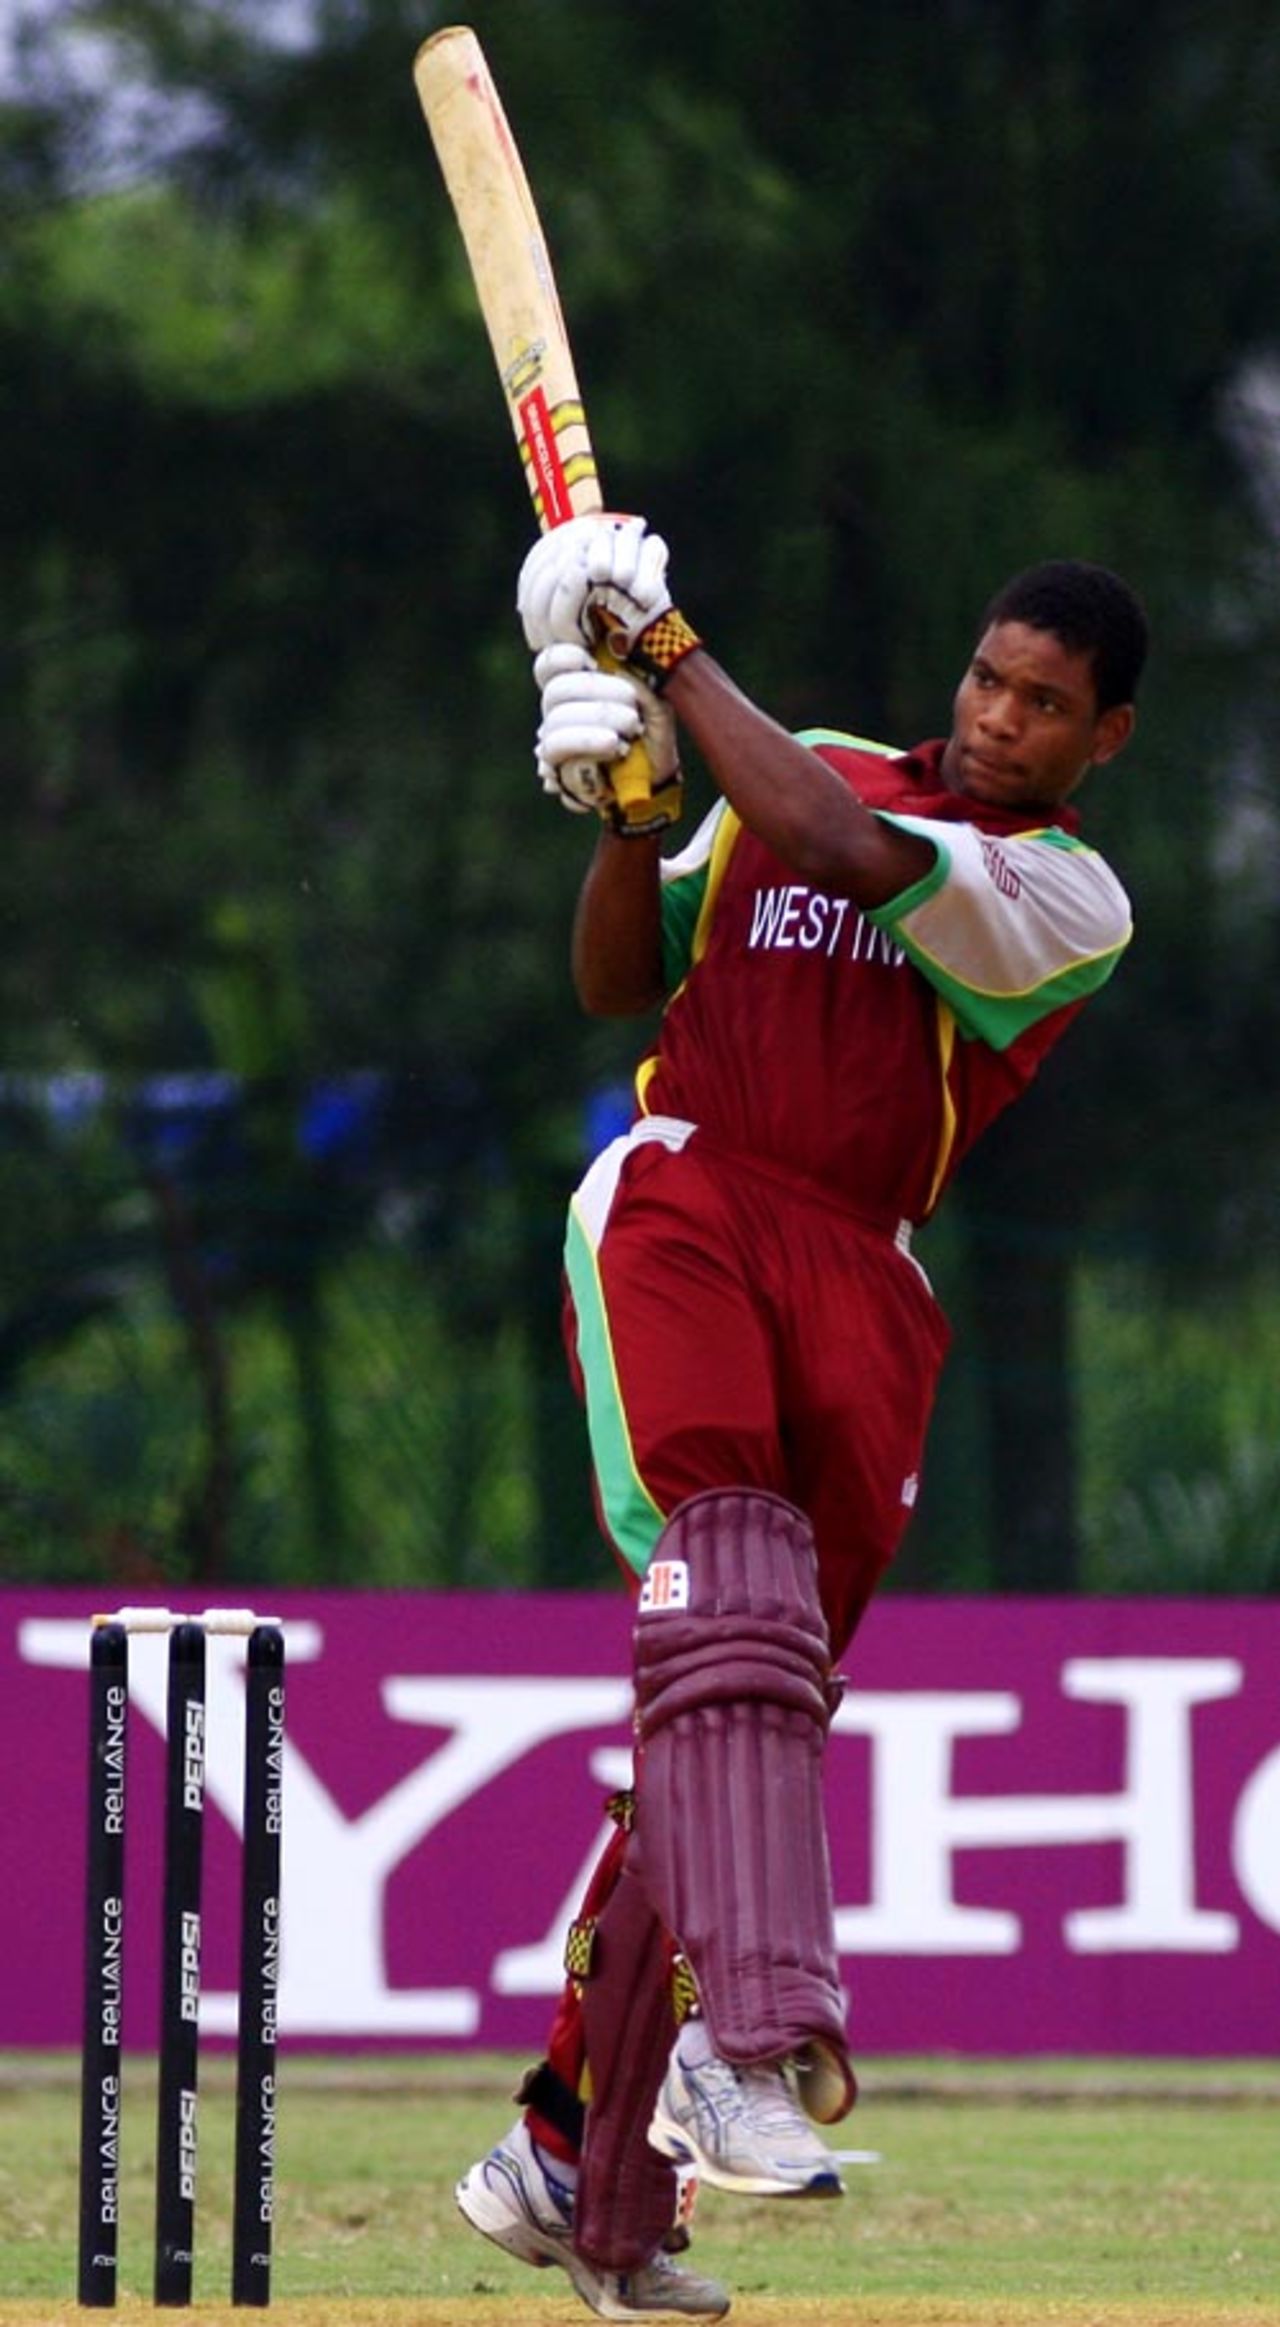 Kieran Powell eases one through the on side, Nepal v West Indies, plate final, Under-19 World Cup, Kuala Lumpur, March 1, 2008 